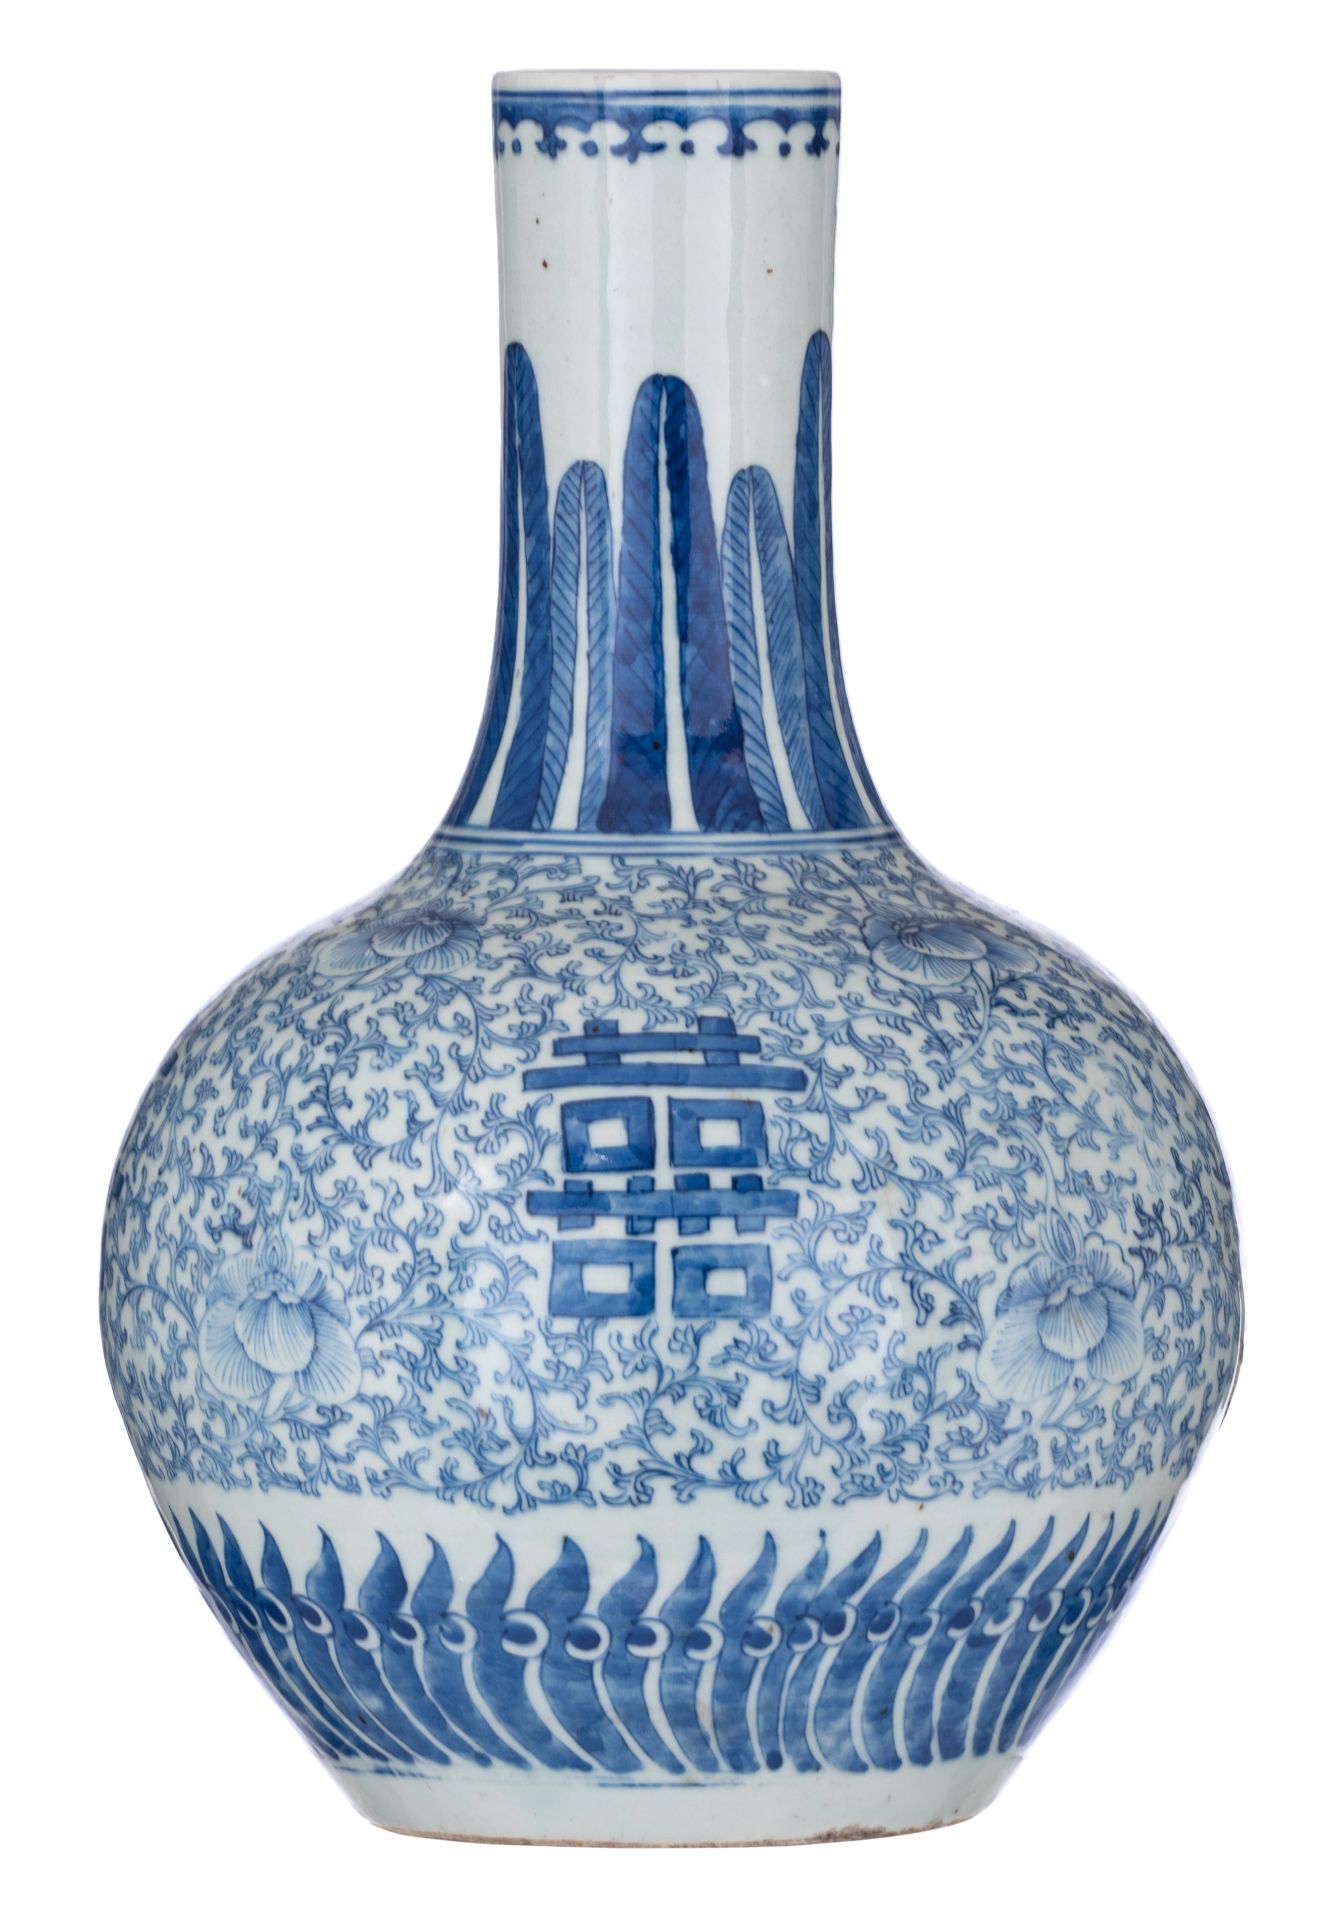 A Chinese blue and white 'Double Xi-sign' bottle vase, early 20thC, H 41 cm